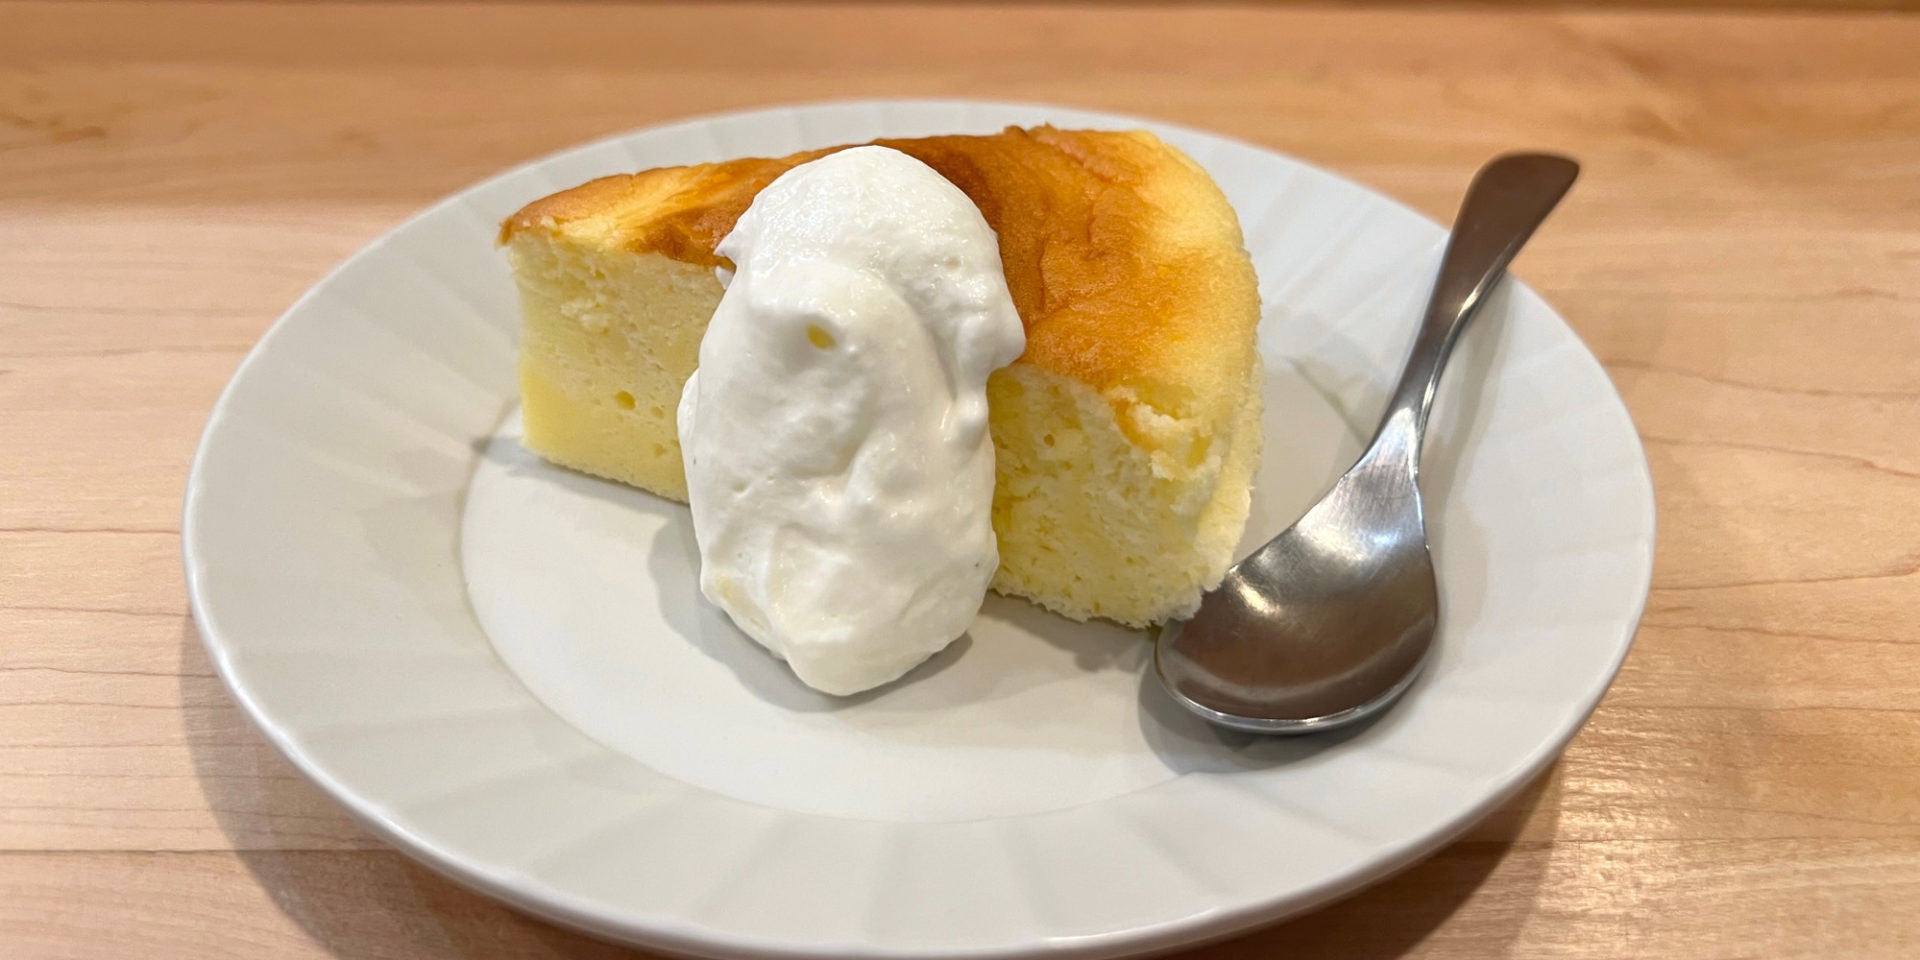 A slice of Japanese cheesecake by Kaori's Oven sits on a white plate with a dollop of fresh whipped cream and a metal spoon. Photo by Alyssa Buckley.